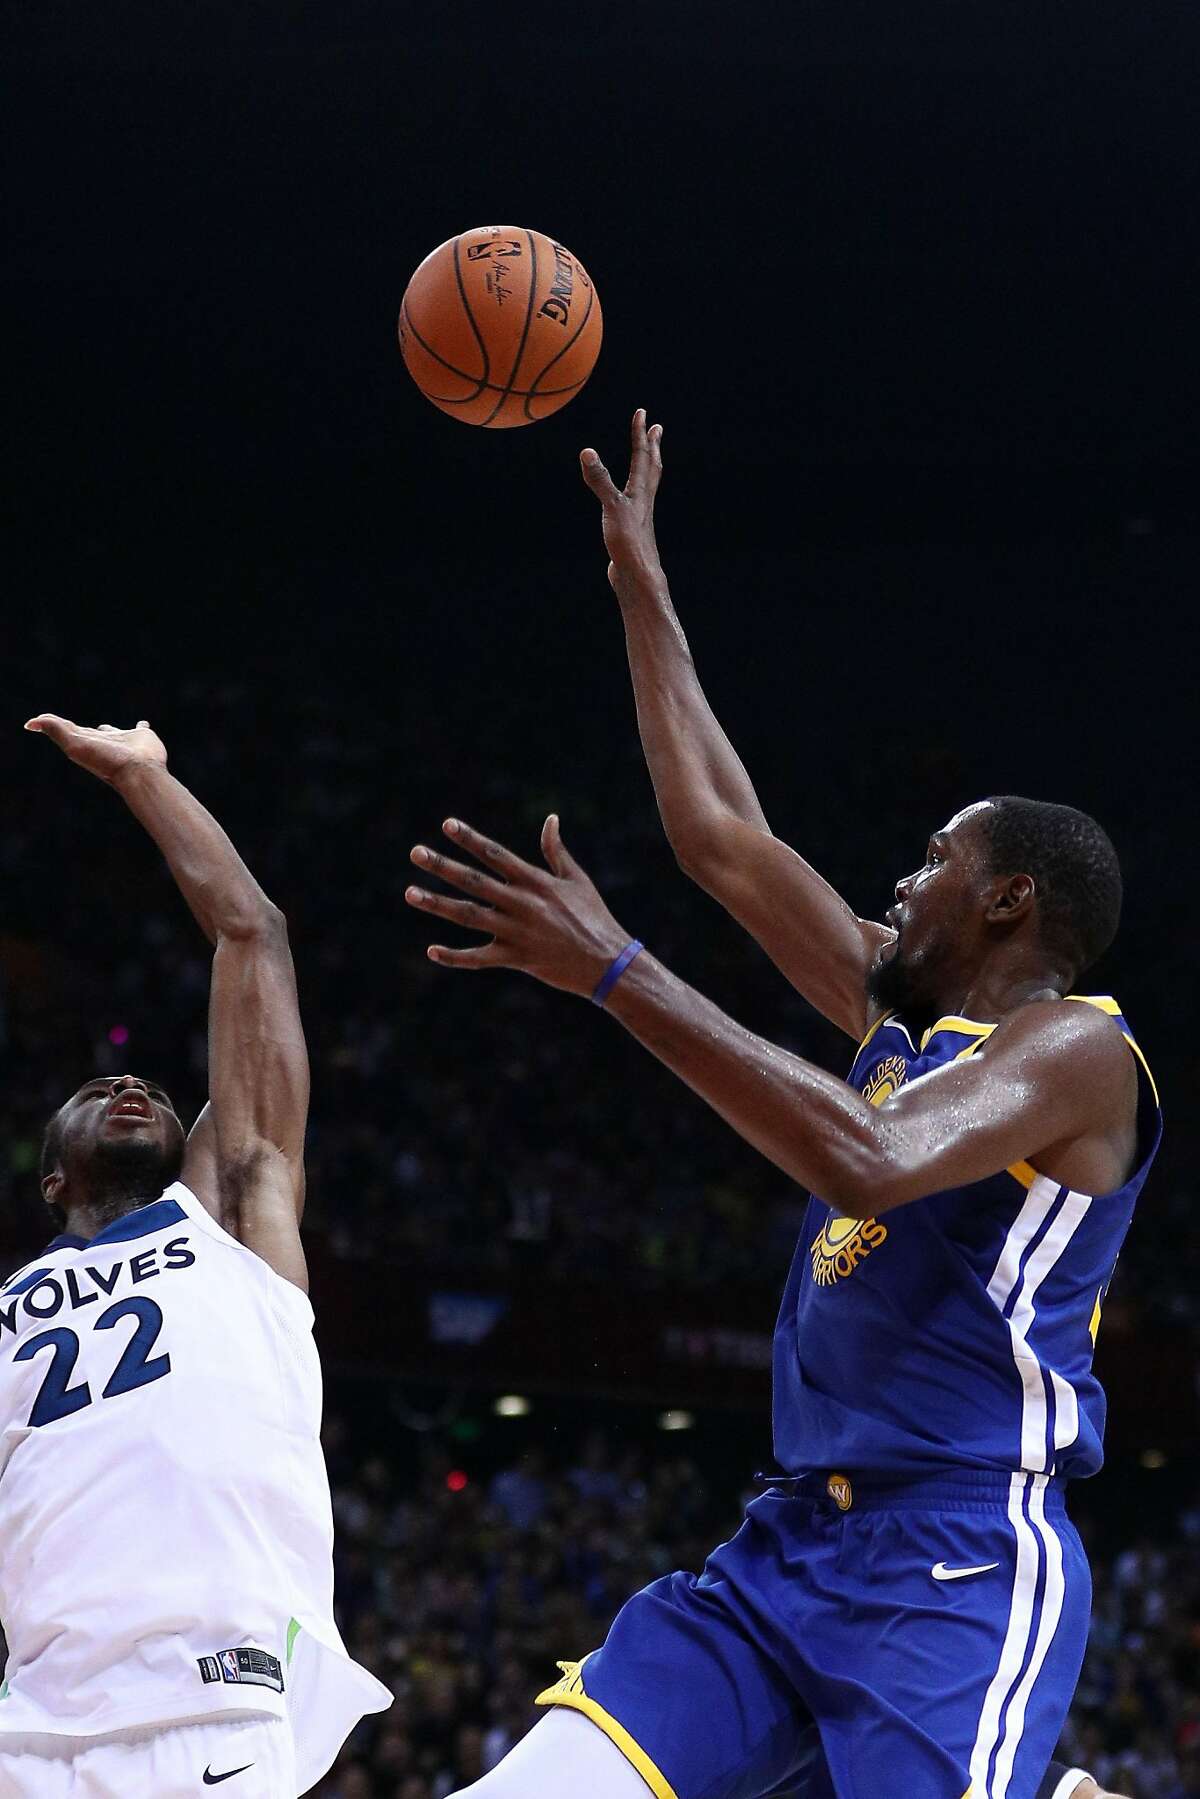 SHENZHEN, CHINA - OCTOBER 05: Kevin Durant #35 of the Golden State Warriors in action against Andrew Wiggins #22 of the Minnesota Timberwolves during the game between the Minnesota Timberwolves and the Golden State Warriors as part of 2017 NBA Global Games China at Universidade Center on October 5, 2017 in Shenzhen, China. (Photo by Zhong Zhi/Getty Images)